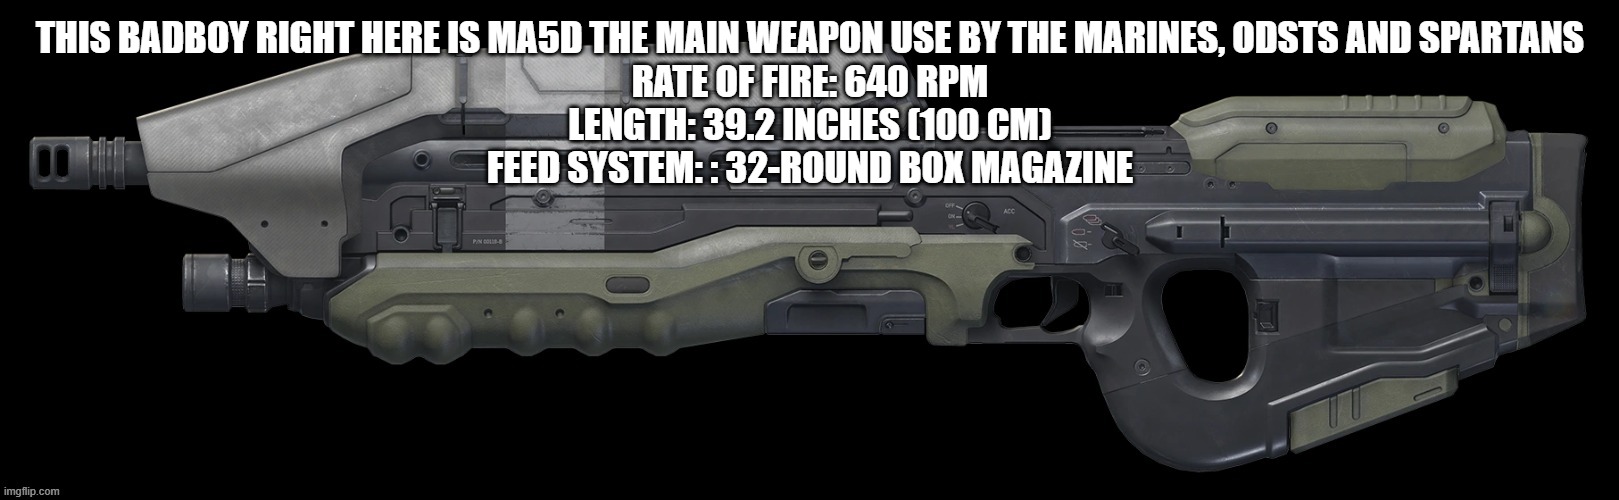 THIS BADBOY RIGHT HERE IS MA5D THE MAIN WEAPON USE BY THE MARINES, ODSTS AND SPARTANS
RATE OF FIRE: 640 RPM
LENGTH: 39.2 INCHES (100 CM)
FEED SYSTEM: : 32-ROUND BOX MAGAZINE | made w/ Imgflip meme maker